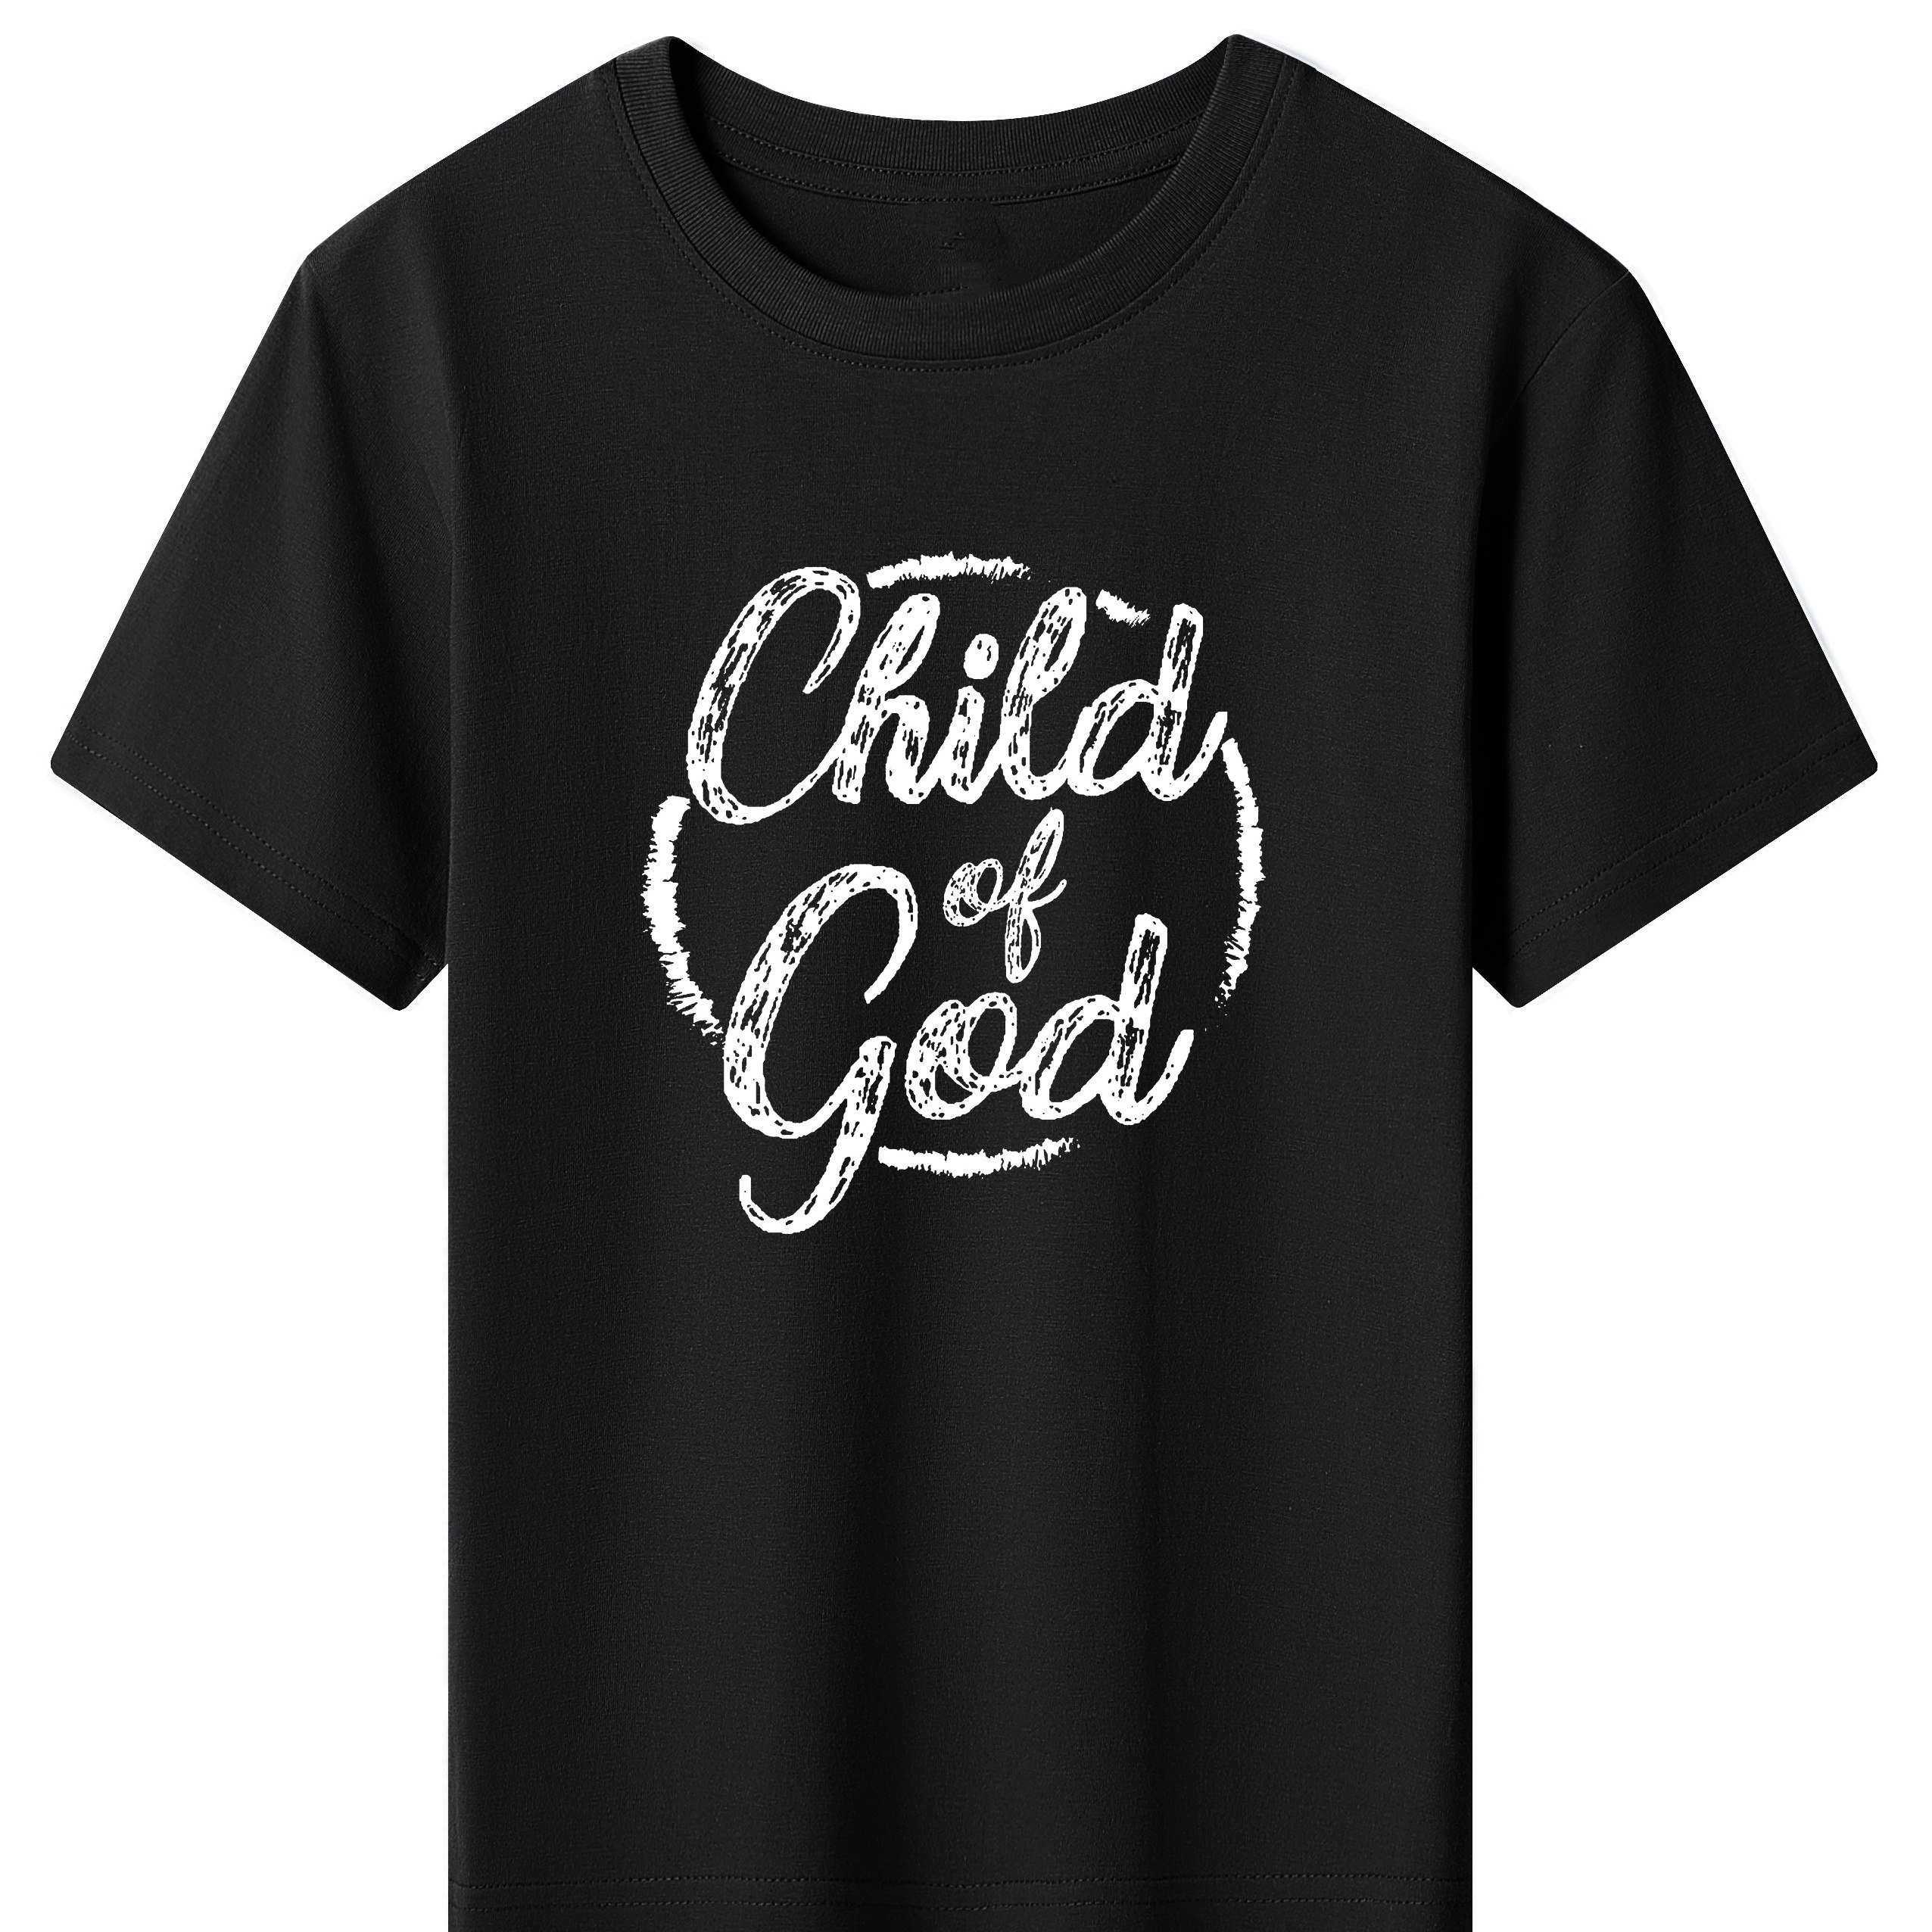 

Fashion Child Of God Letter Print Boys Creative Cotton T-shirt, Casual Lightweight Comfy Short Sleeve Crew Neck Tee Tops, Kids Clothings For Summer